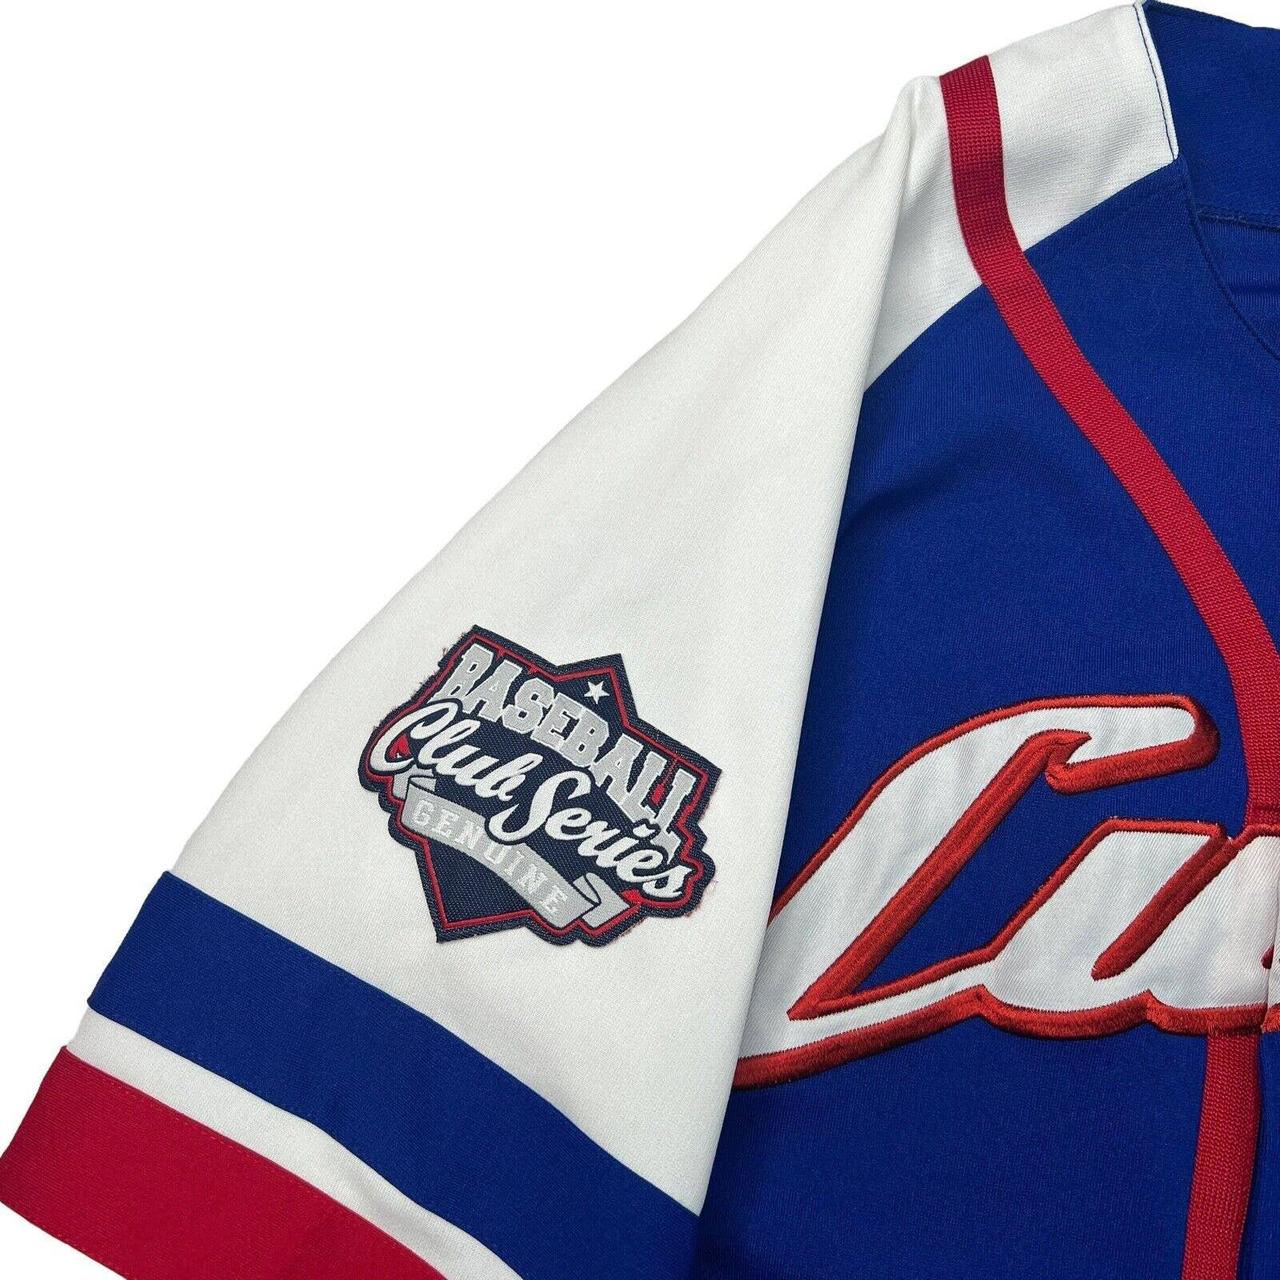 New MLB Chicago Cubs Dynasty Club Series Throwback Retro Jersey